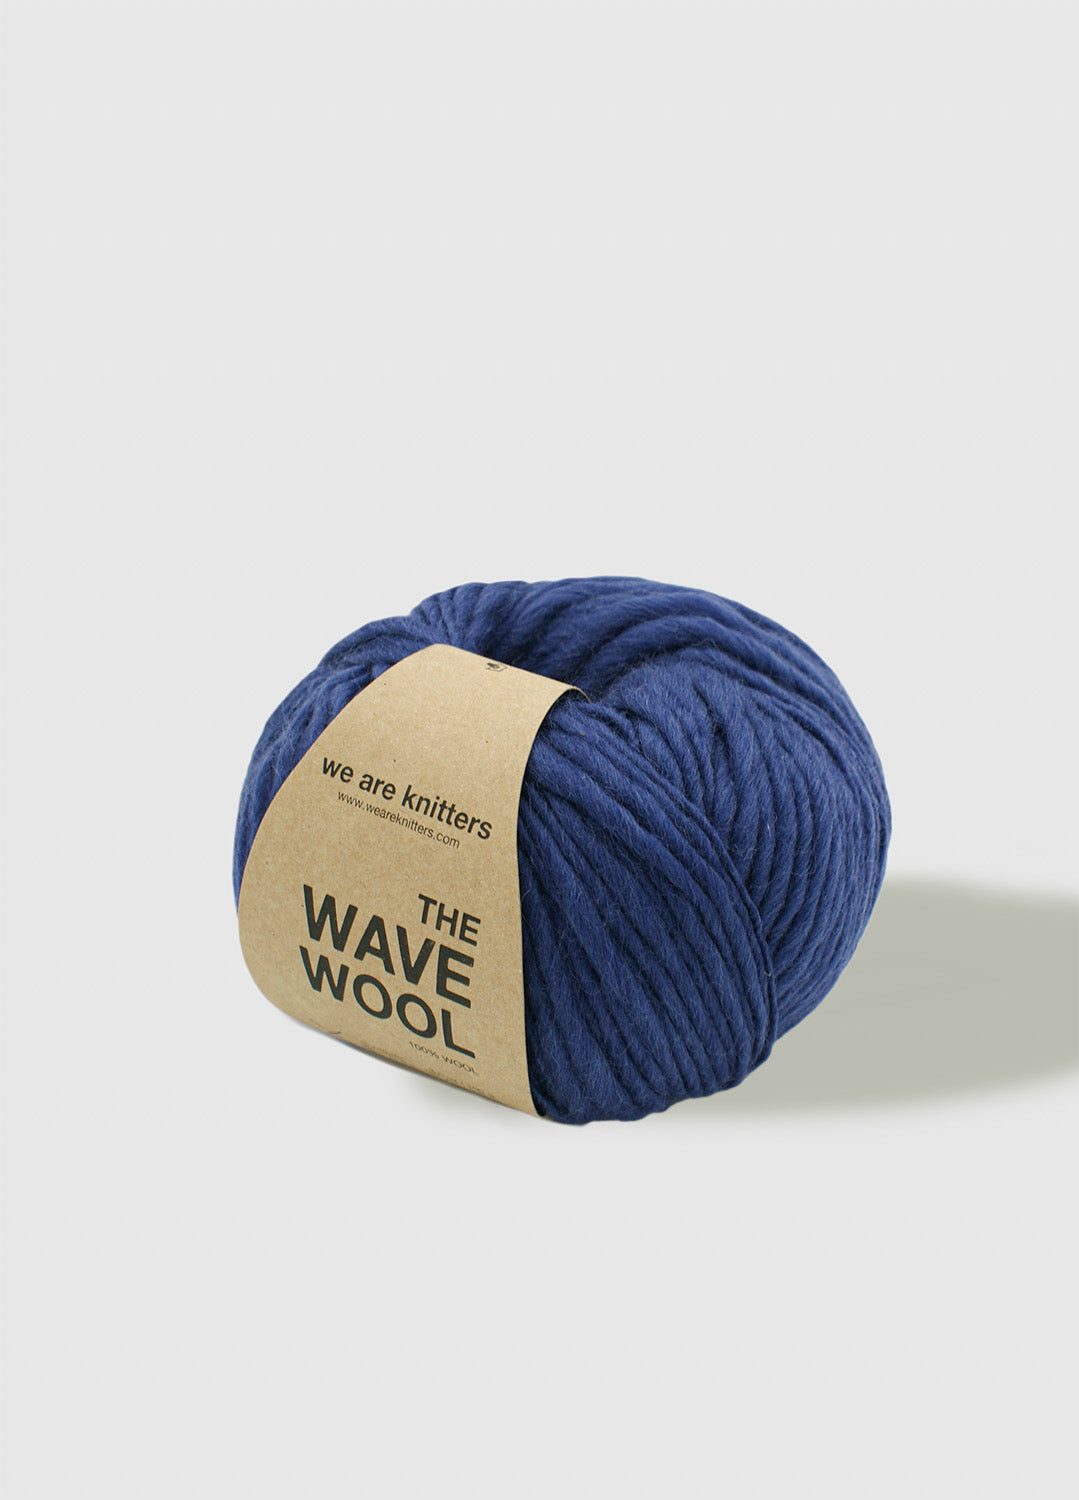 The Wave Wool Blue Rey